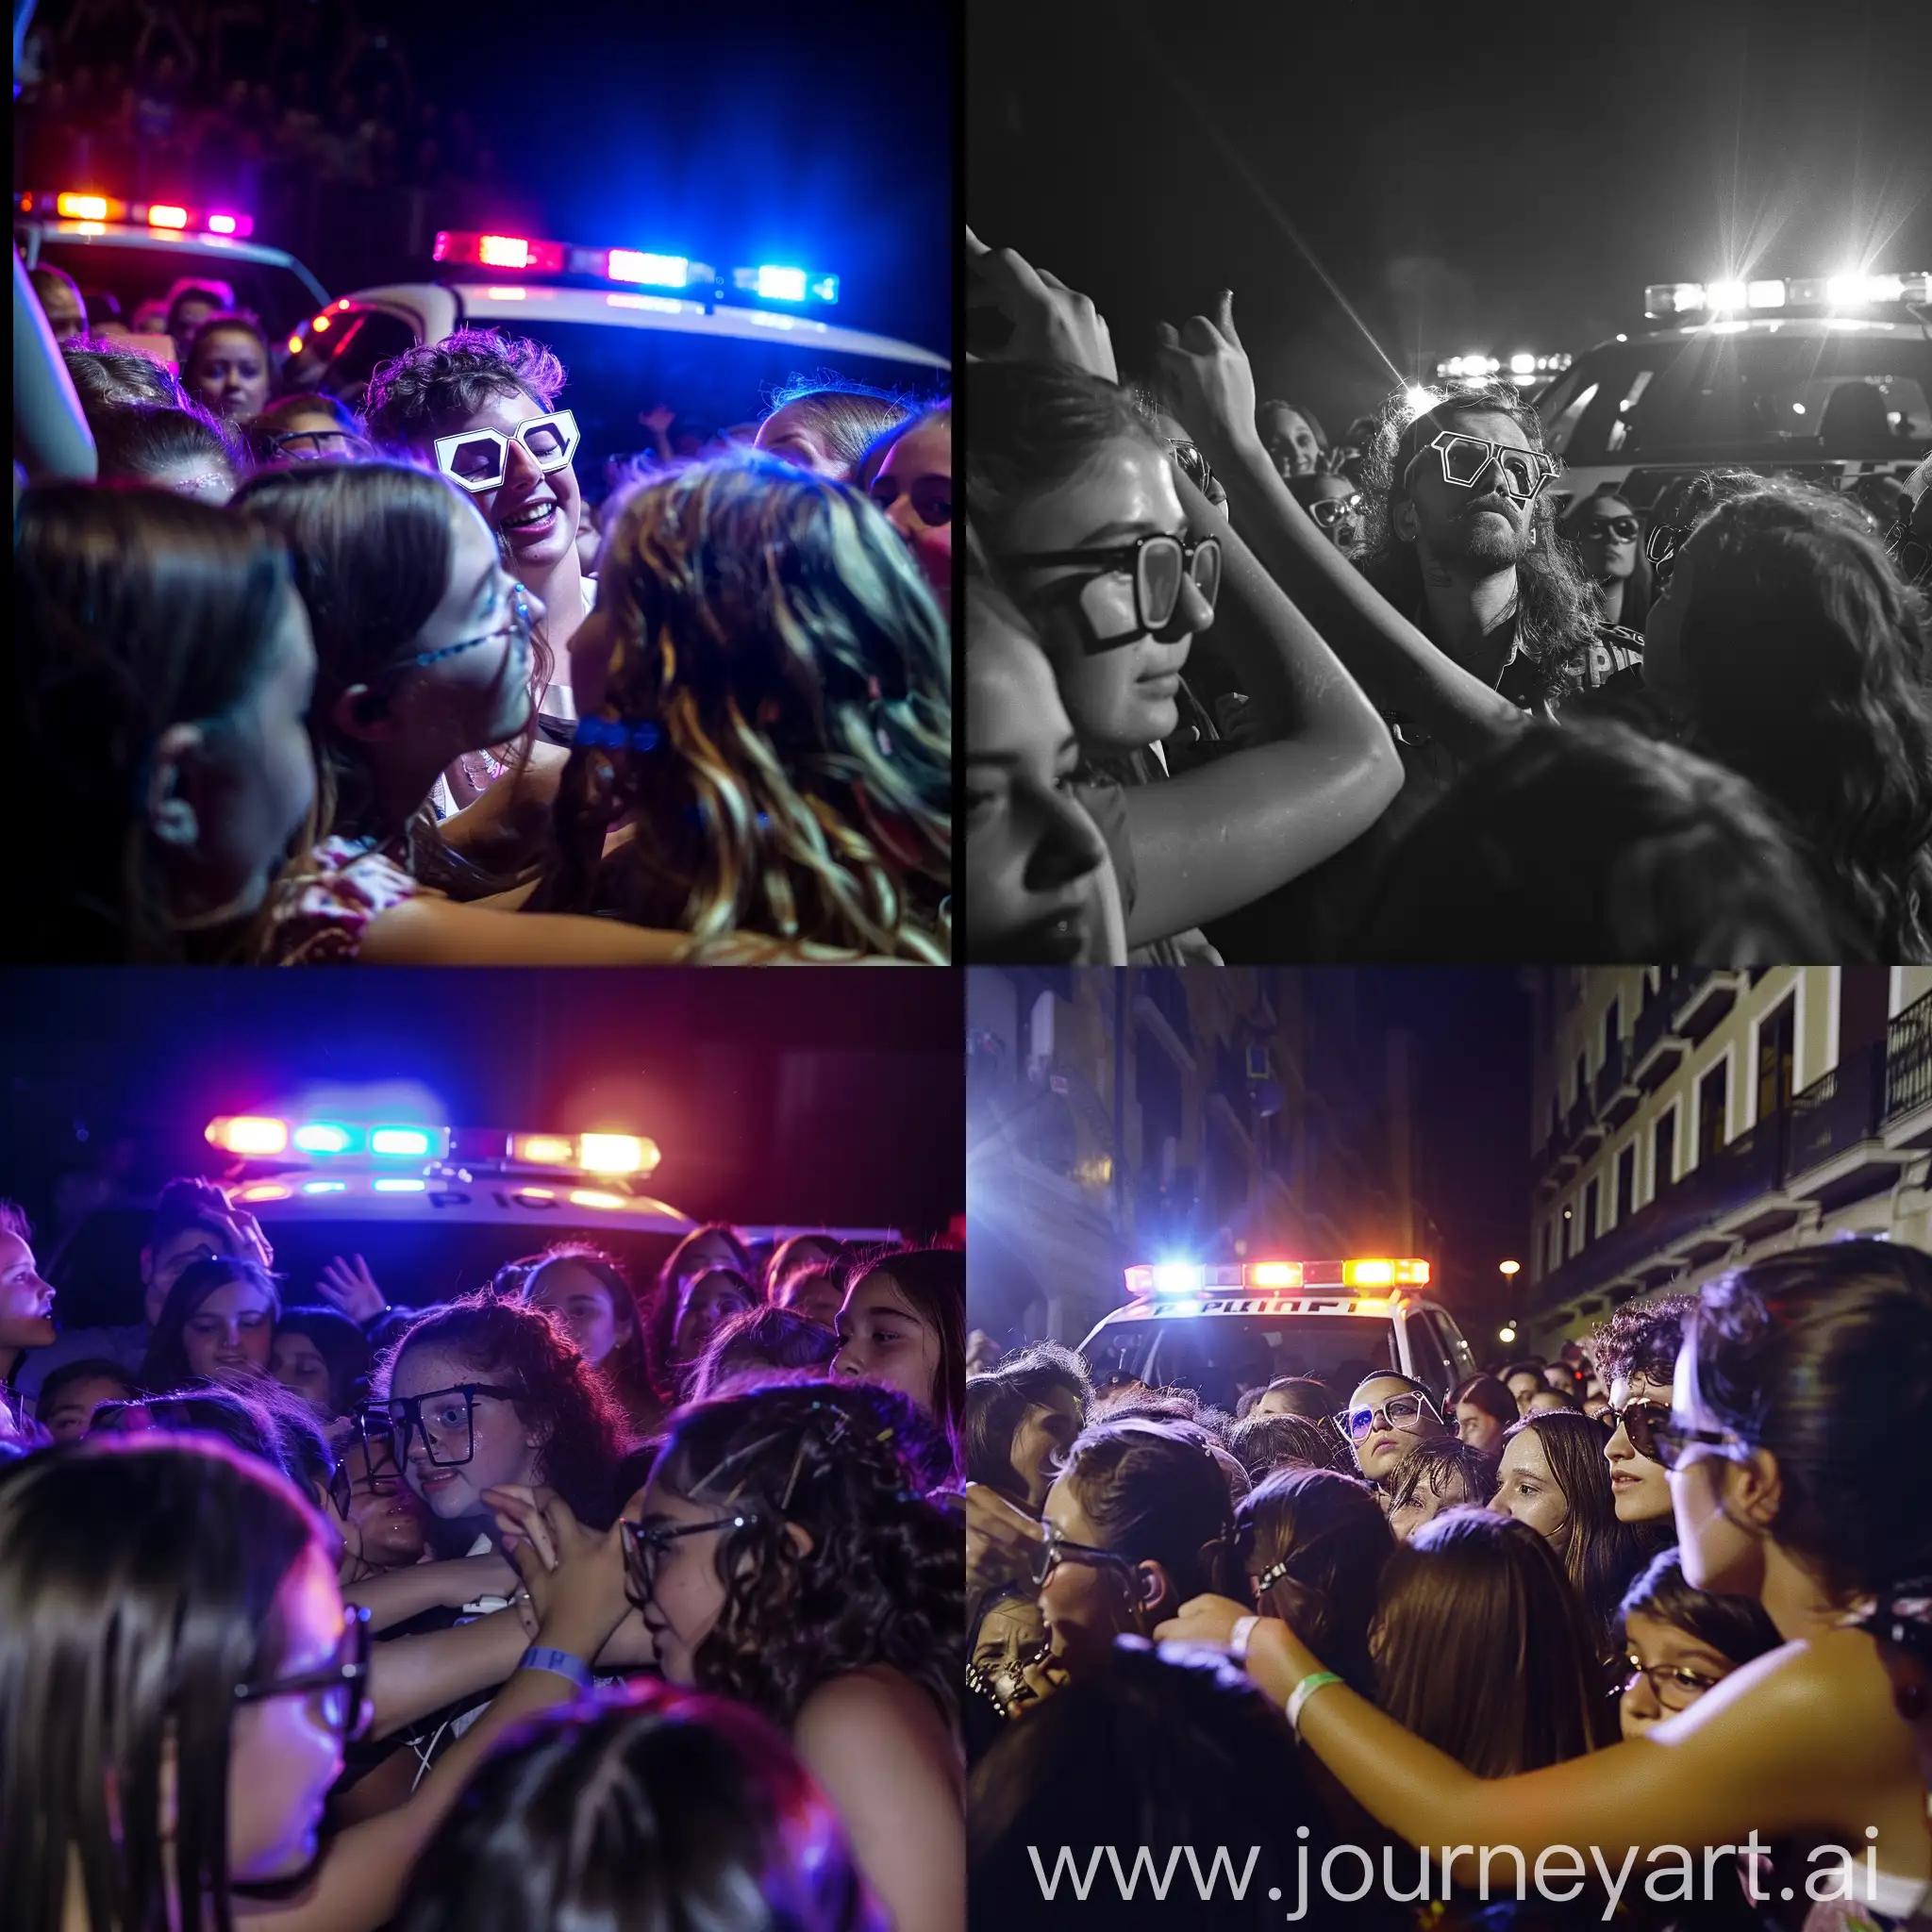 Girls-Attempting-Photo-with-Musician-Amidst-Police-Lights